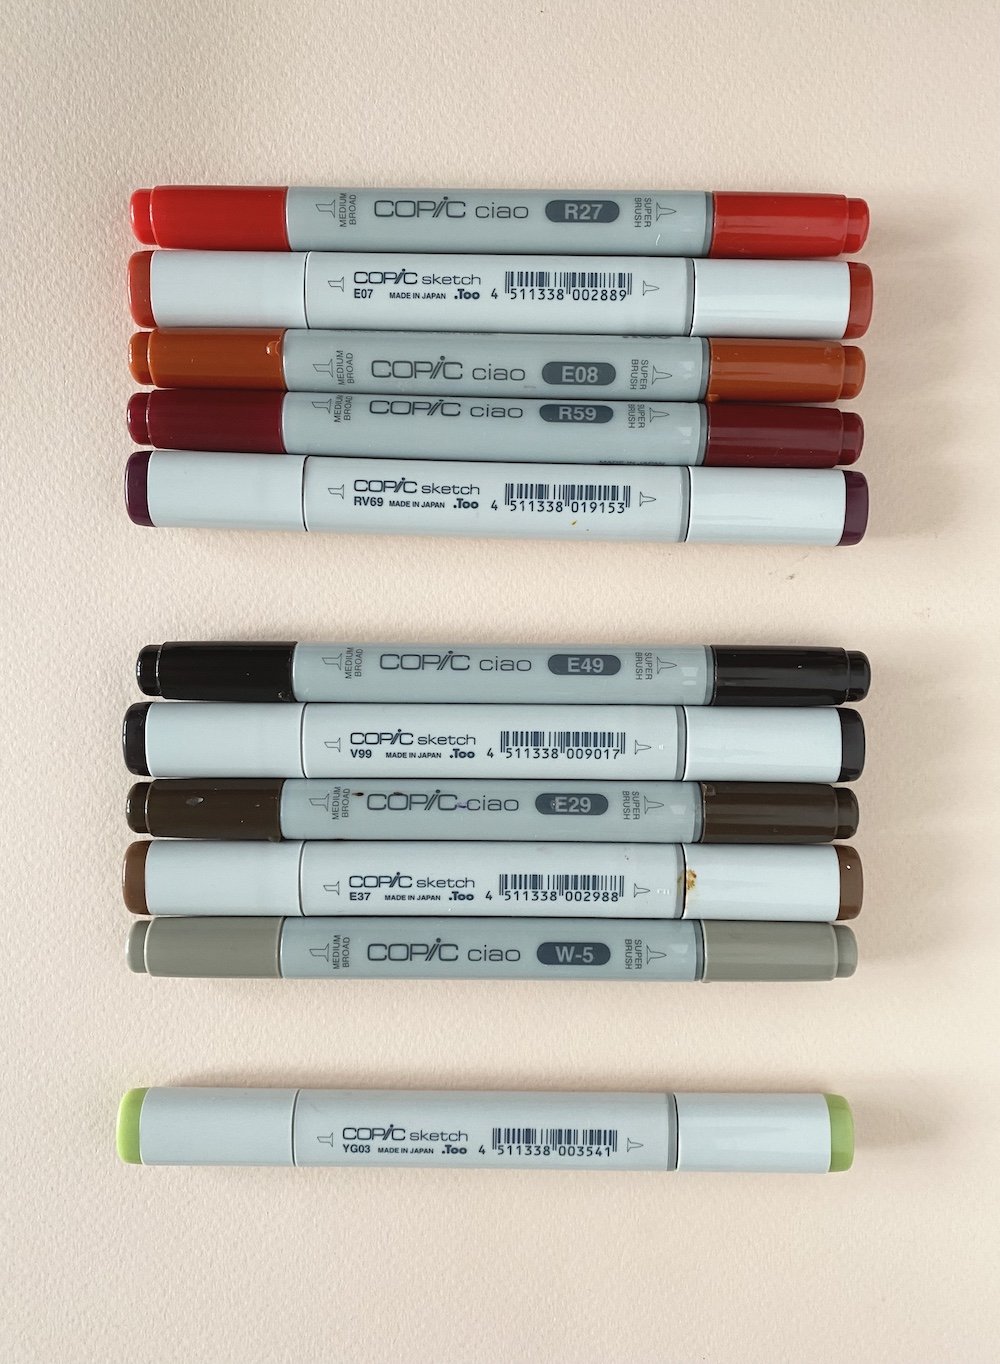 What are the best cheap alcohol based markers to use as copic